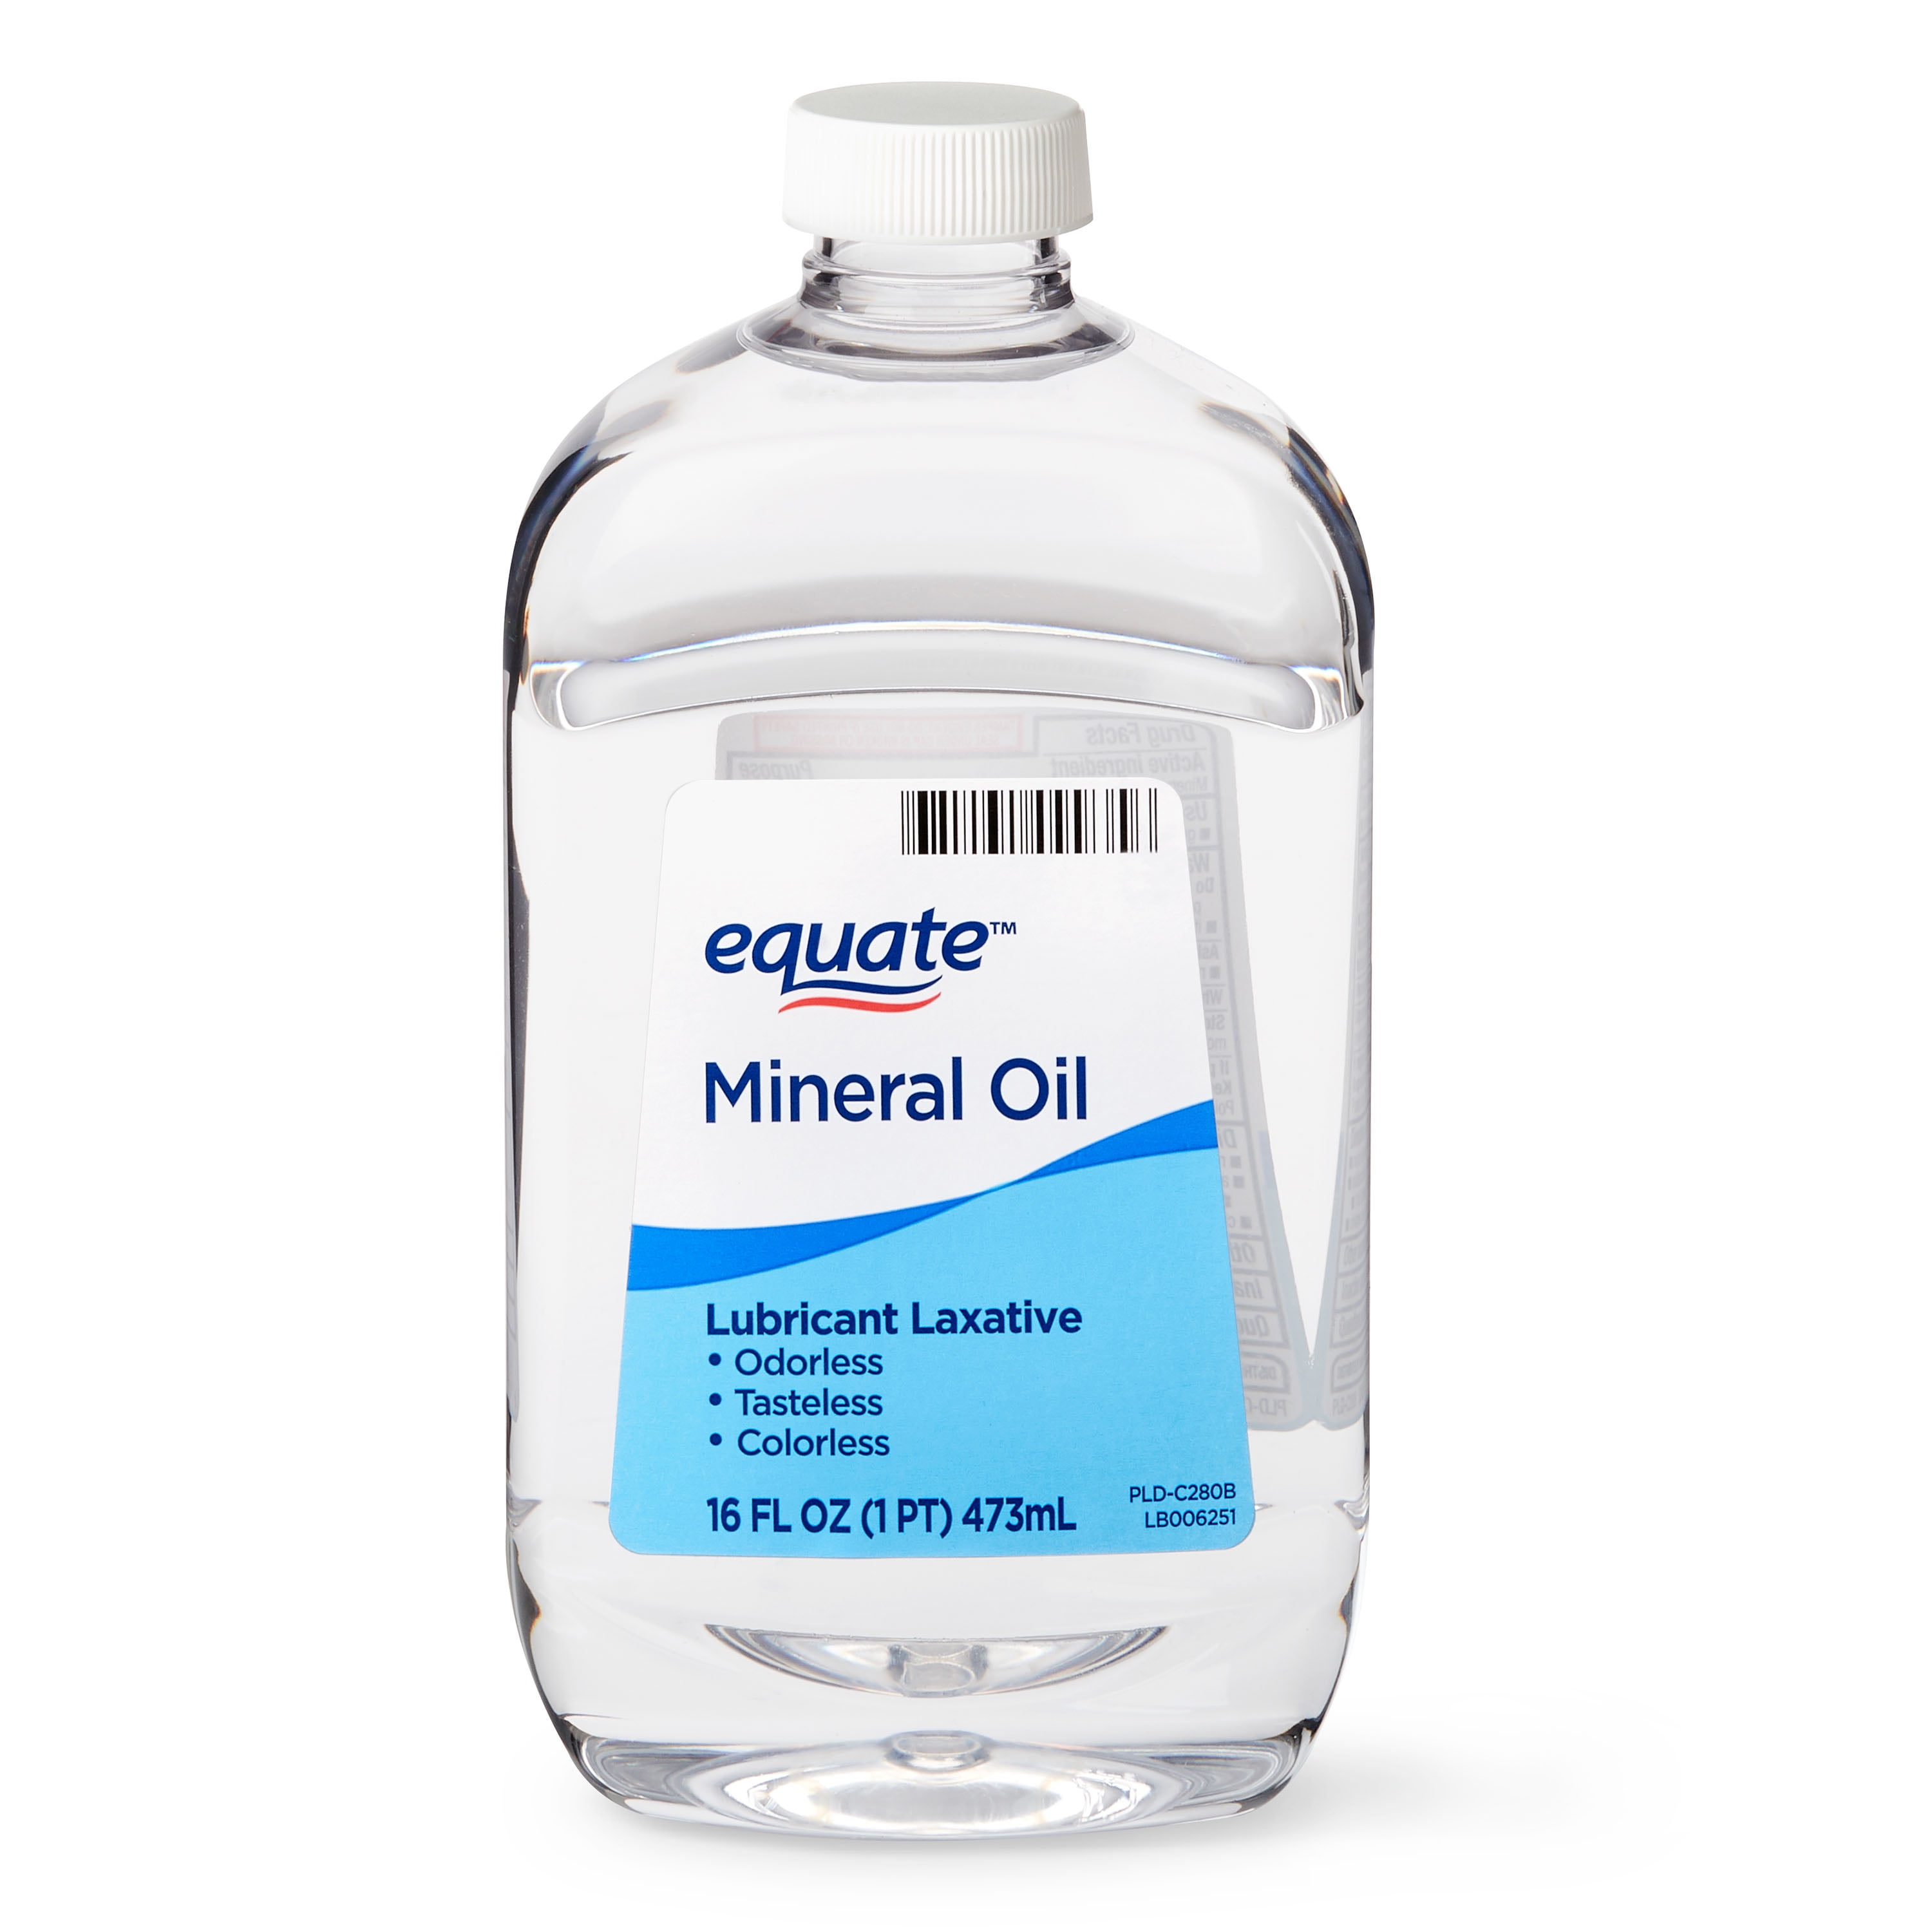 Equate Mineral Oil Lubricant Laxative Liquid for Constipation, 16 FL OZ (474mL)